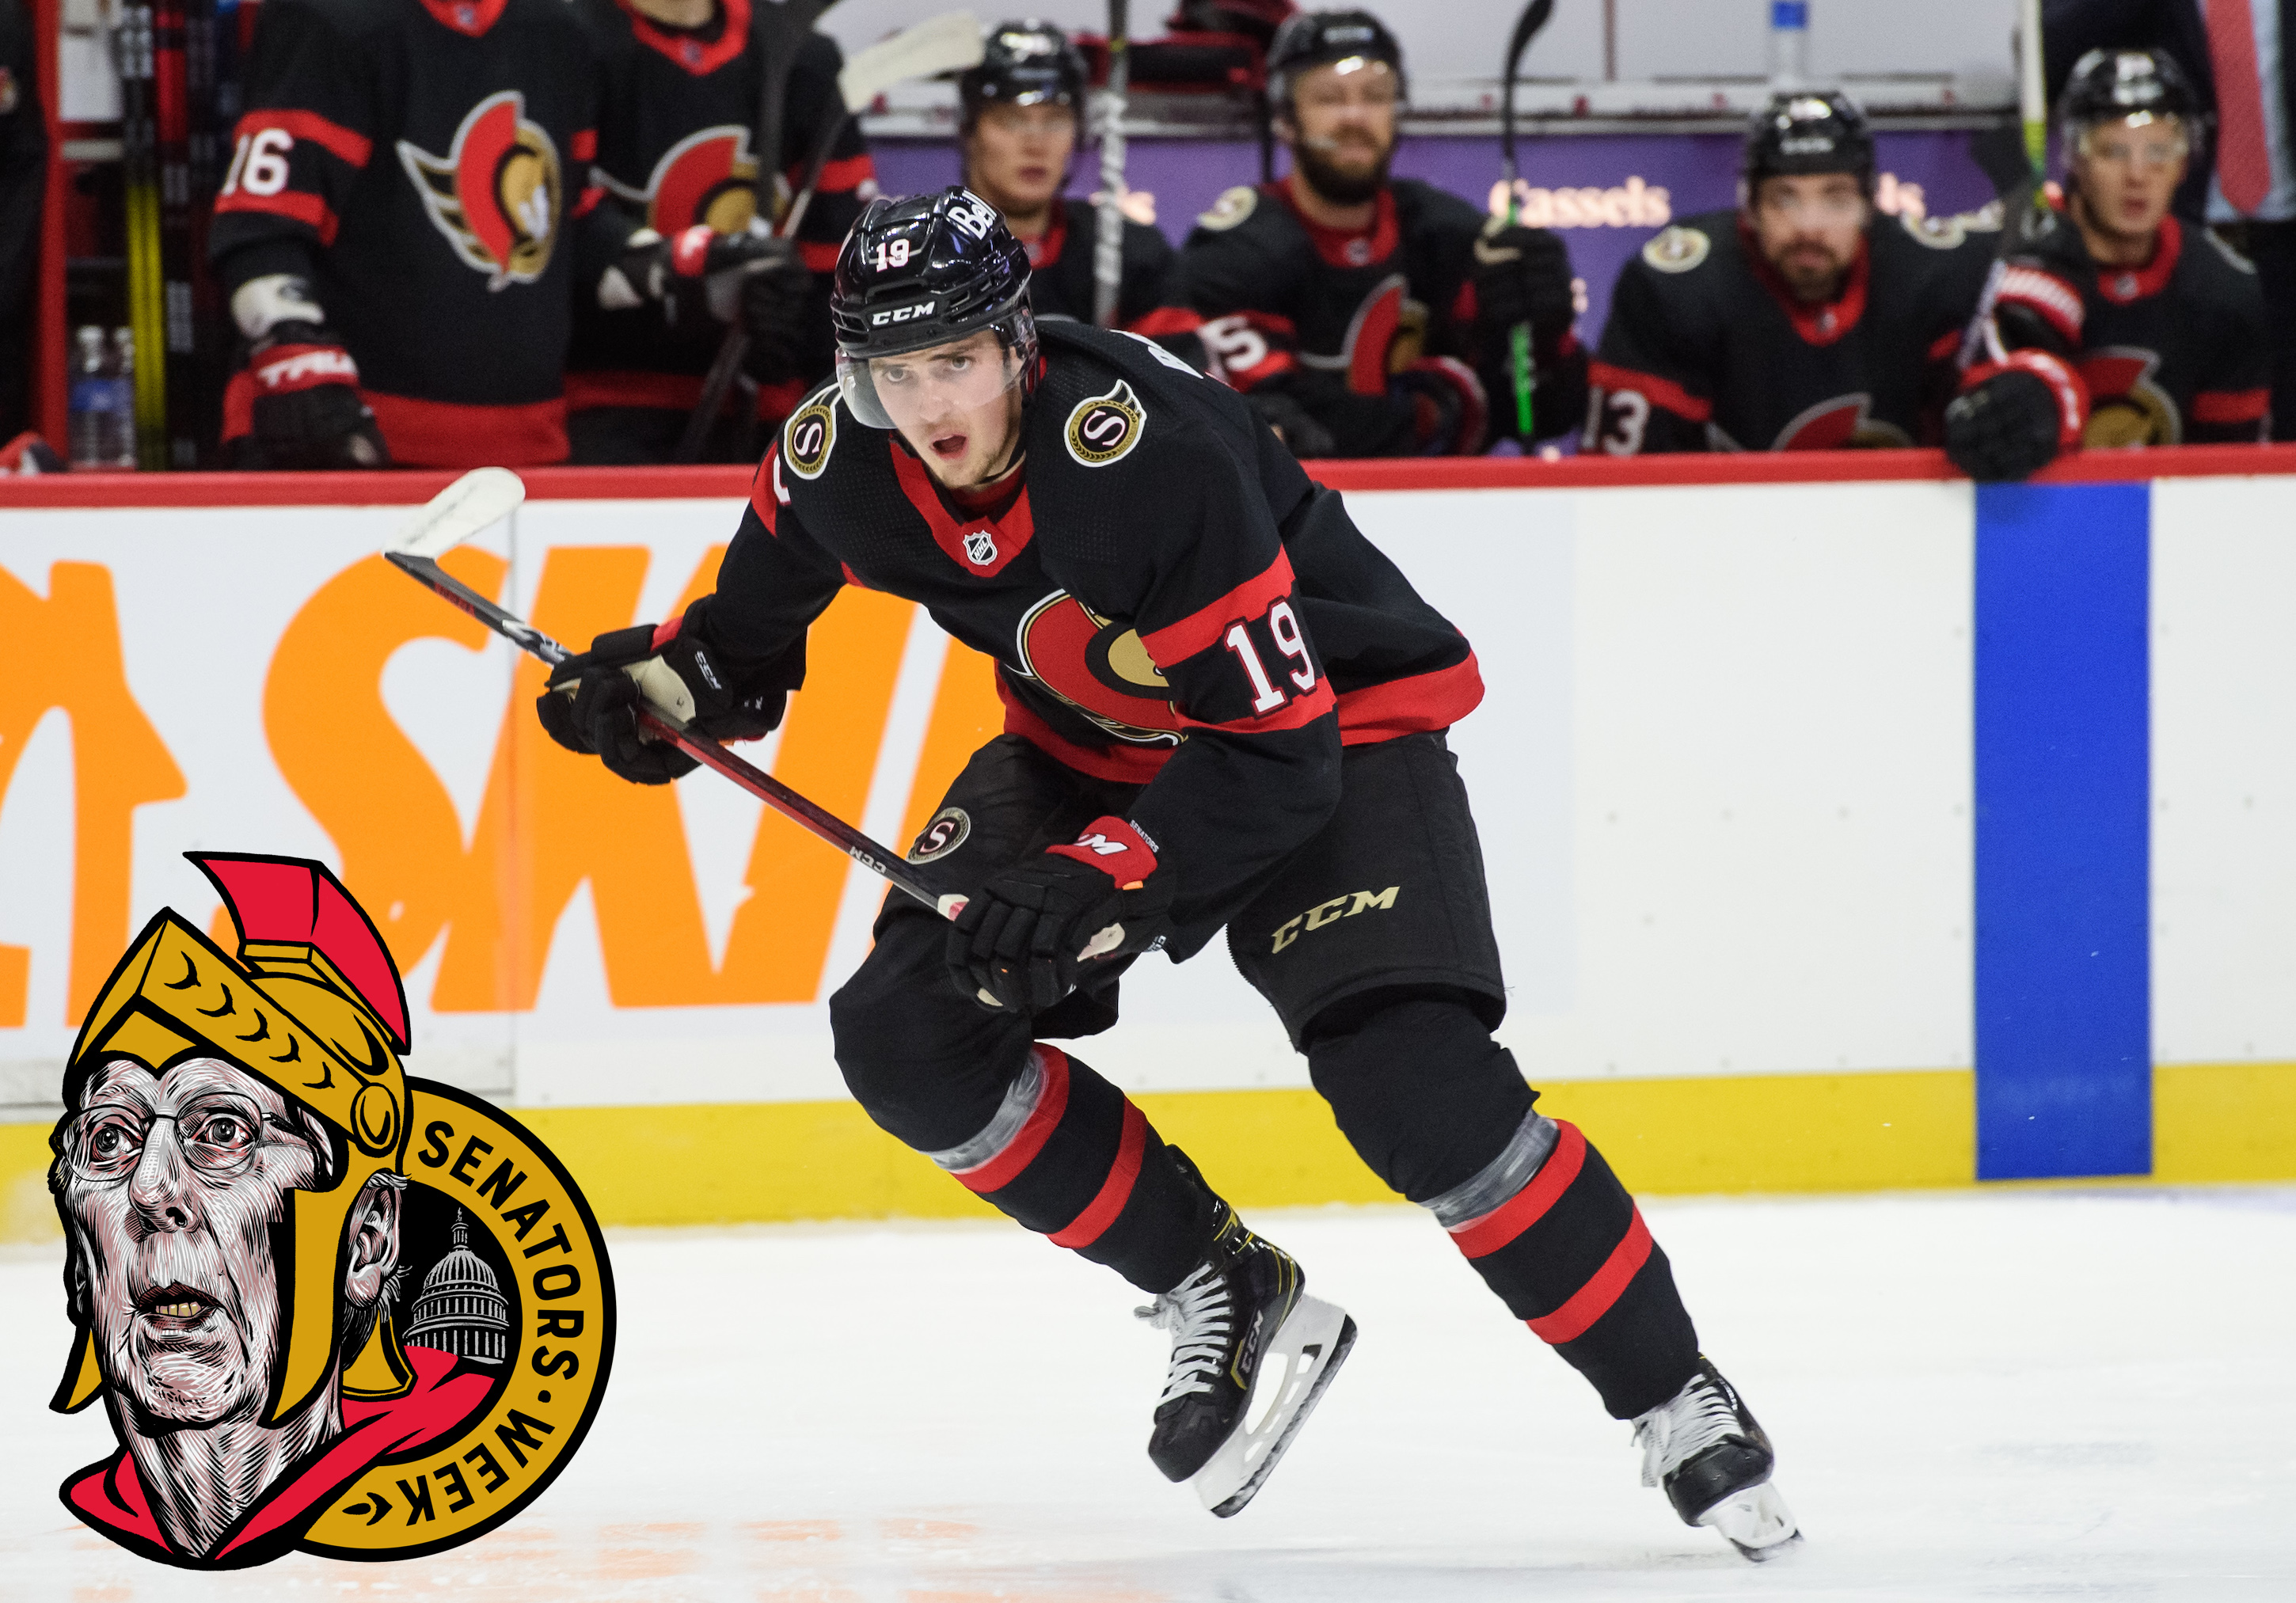 Drake Batherson Talks Hometown, His Top NHL Moments, And His Best